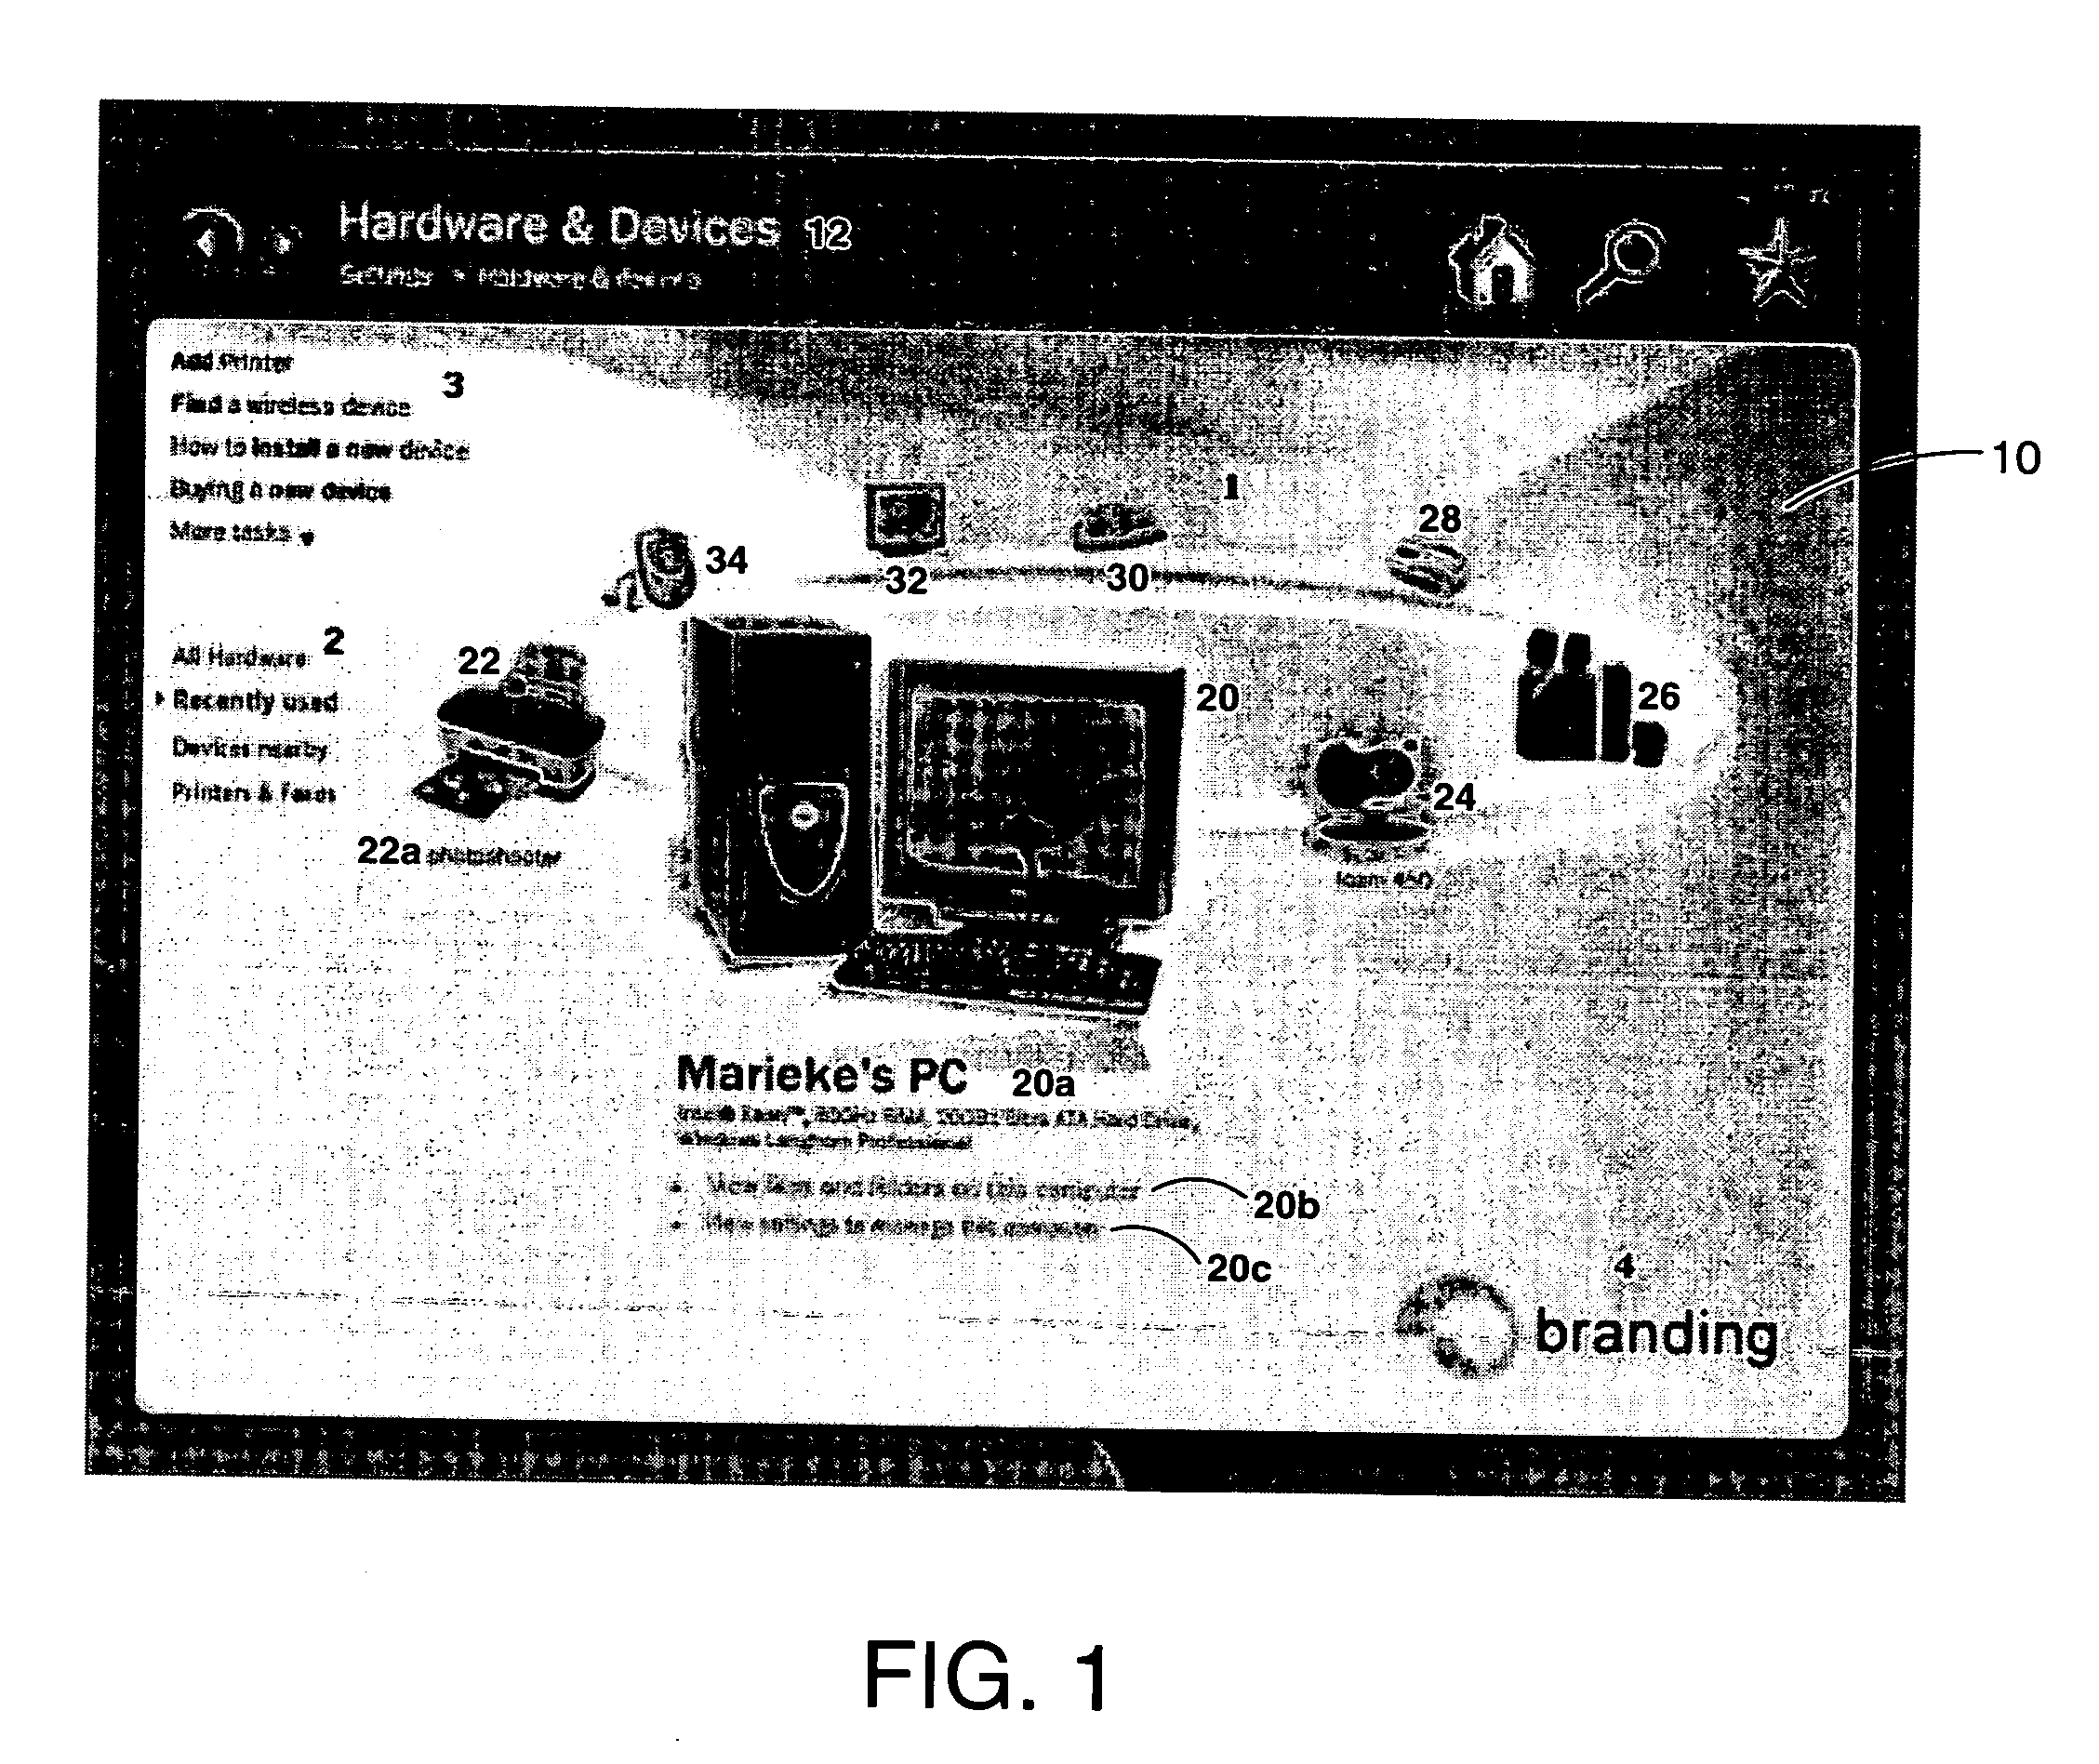 System and method for providing an interactive display